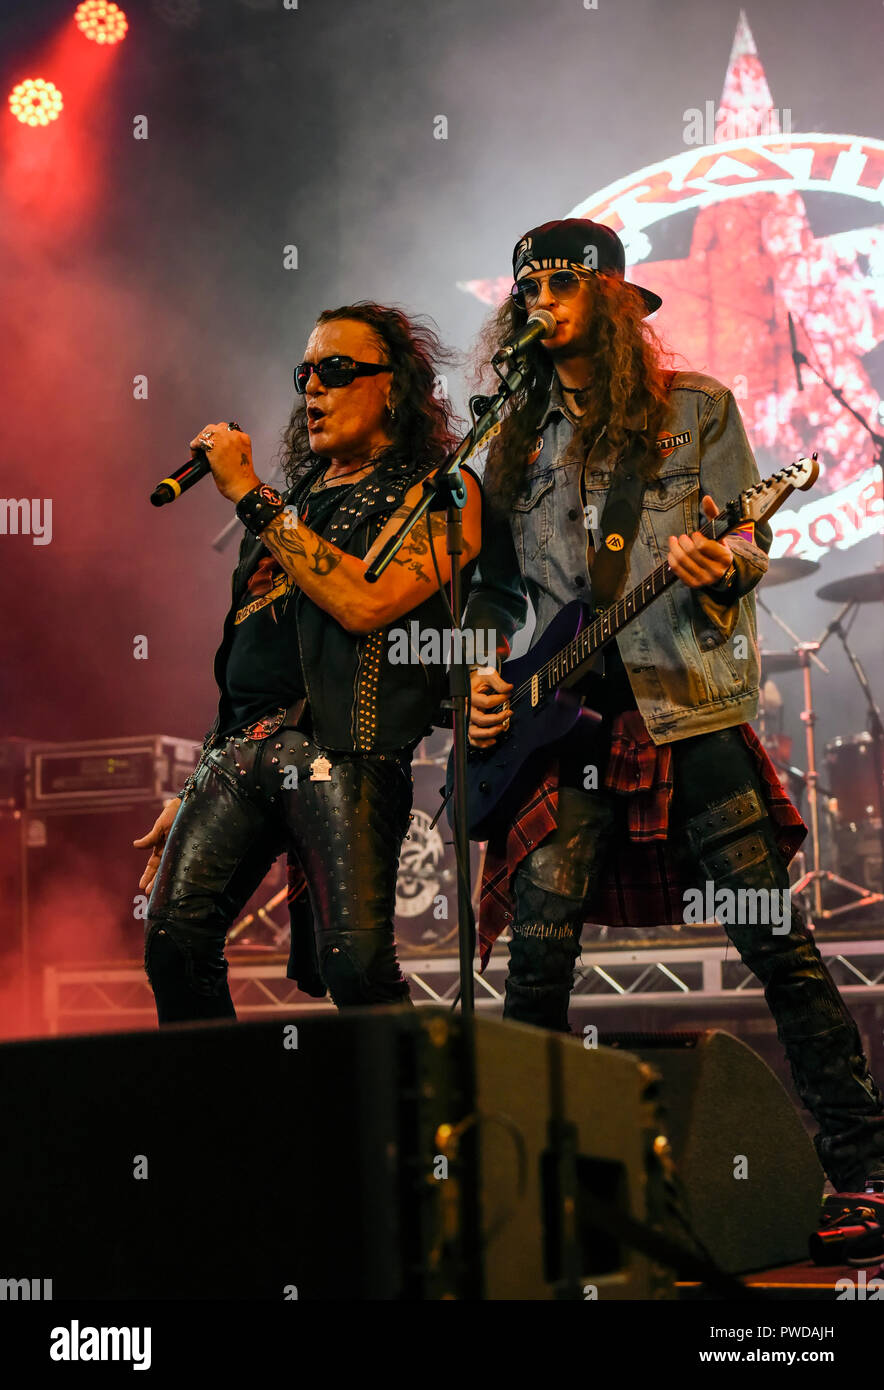 September 29, 2018, Las Vegas, Nevada, The band Ratt plays a free concert at the Las Vegas Fremont Street Experience. Stock Photo